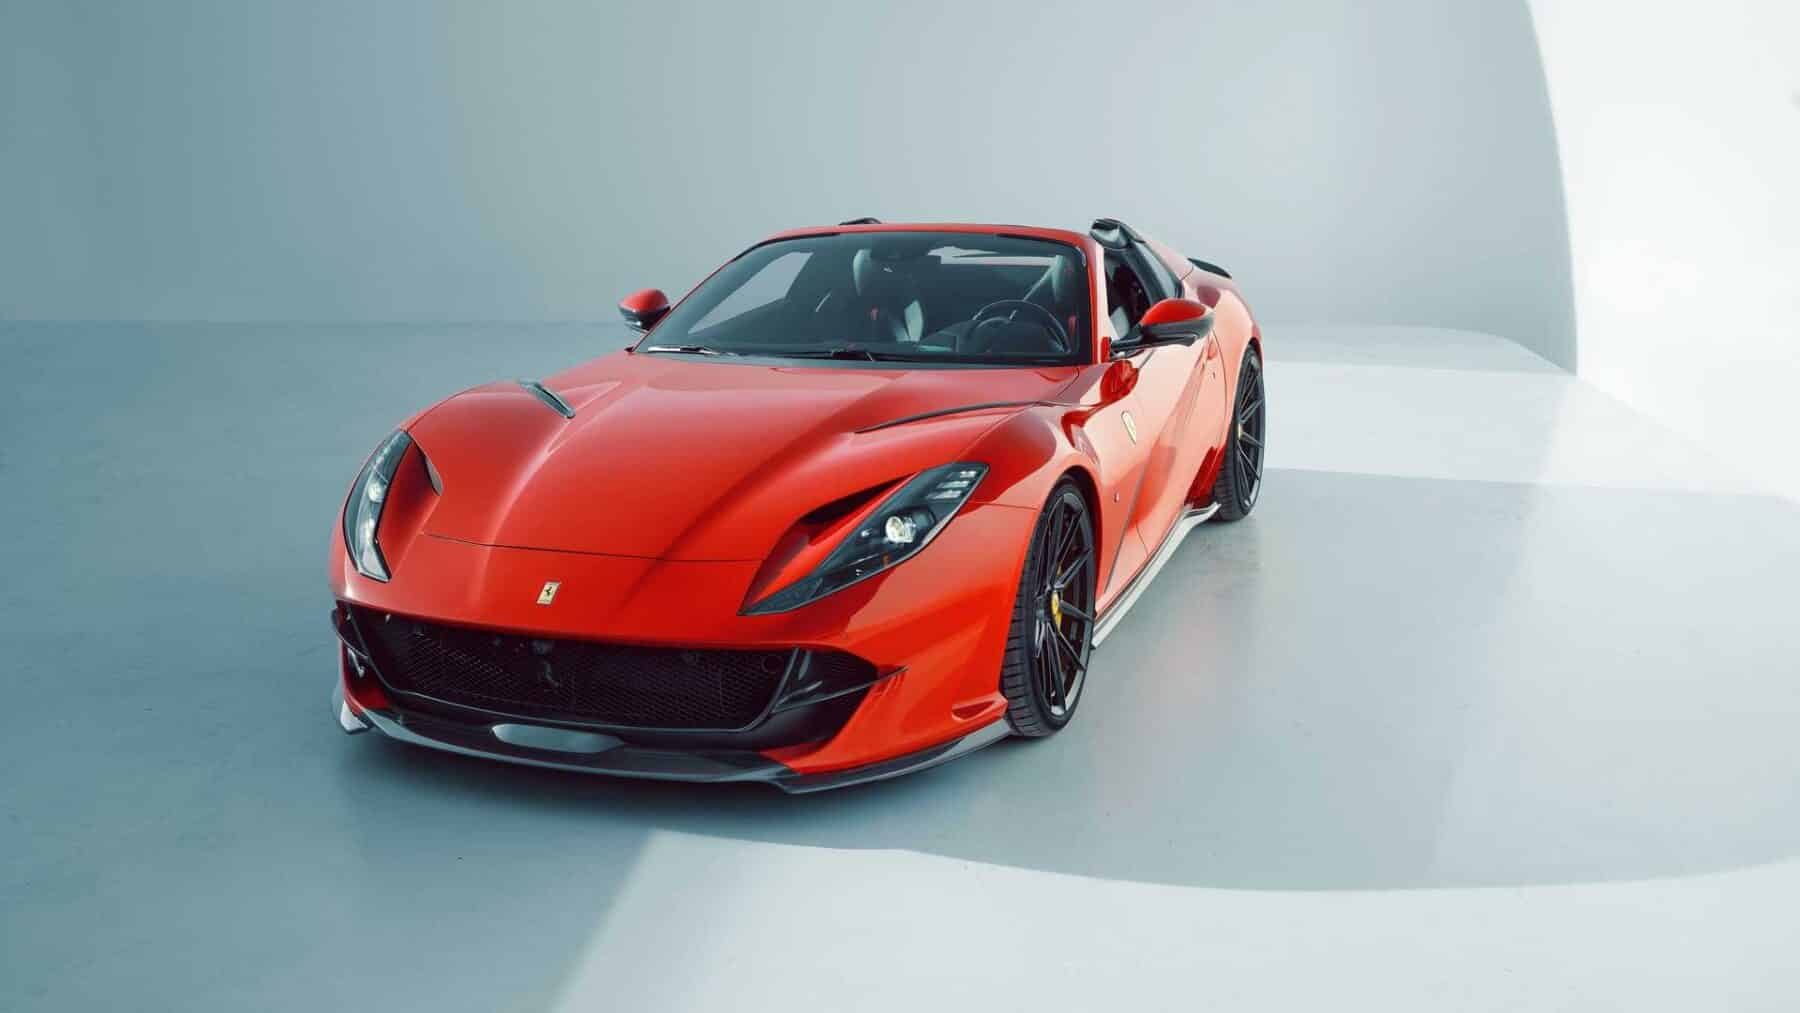 The Ferrari 812 GTS is the latest beast from Novitec and exceeds 850 hp